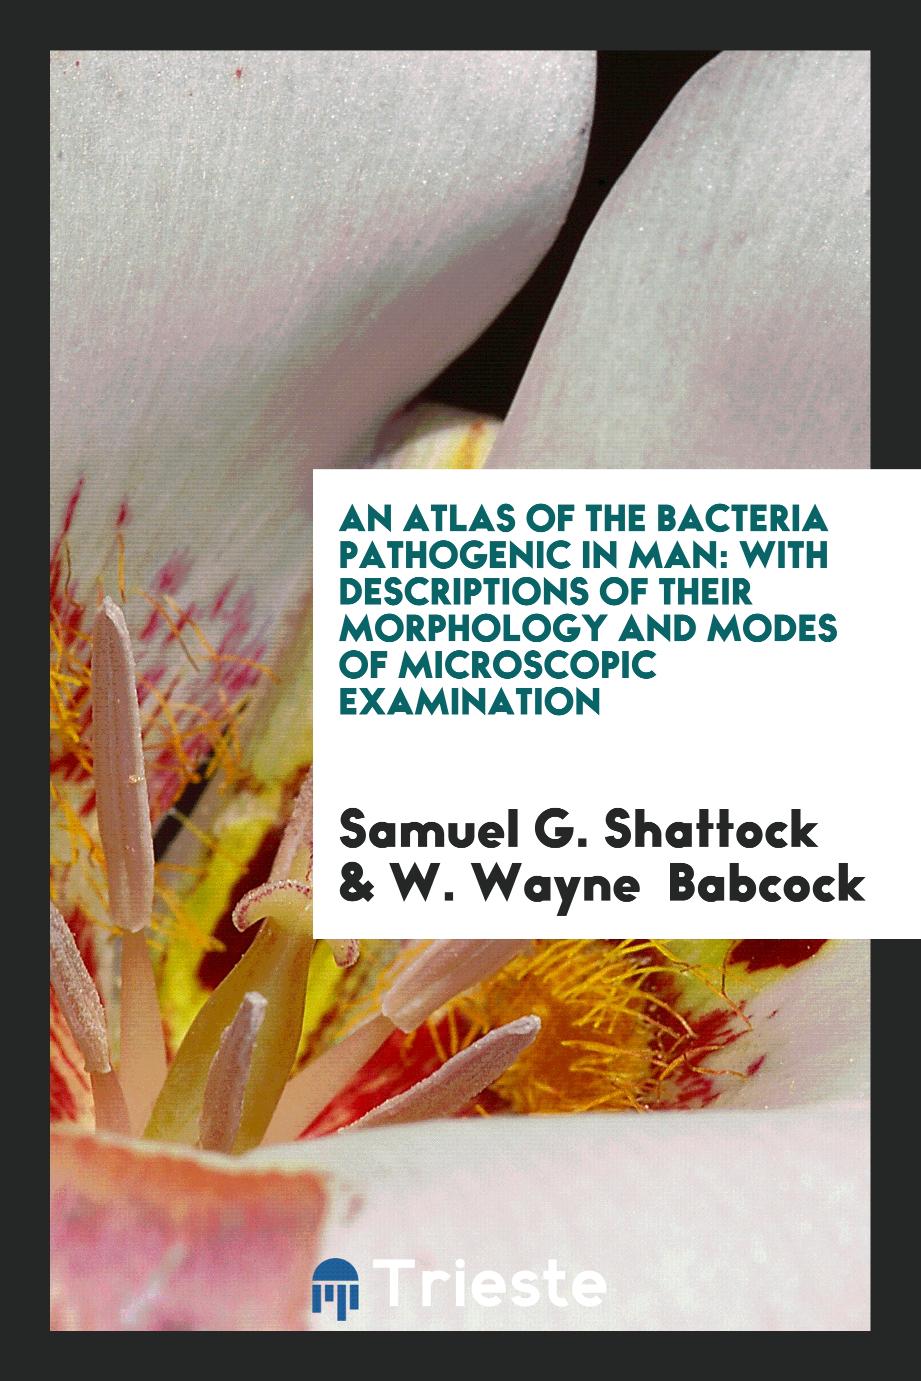 An Atlas of the Bacteria Pathogenic in Man: With Descriptions of Their morphology and modes of microscopic examination